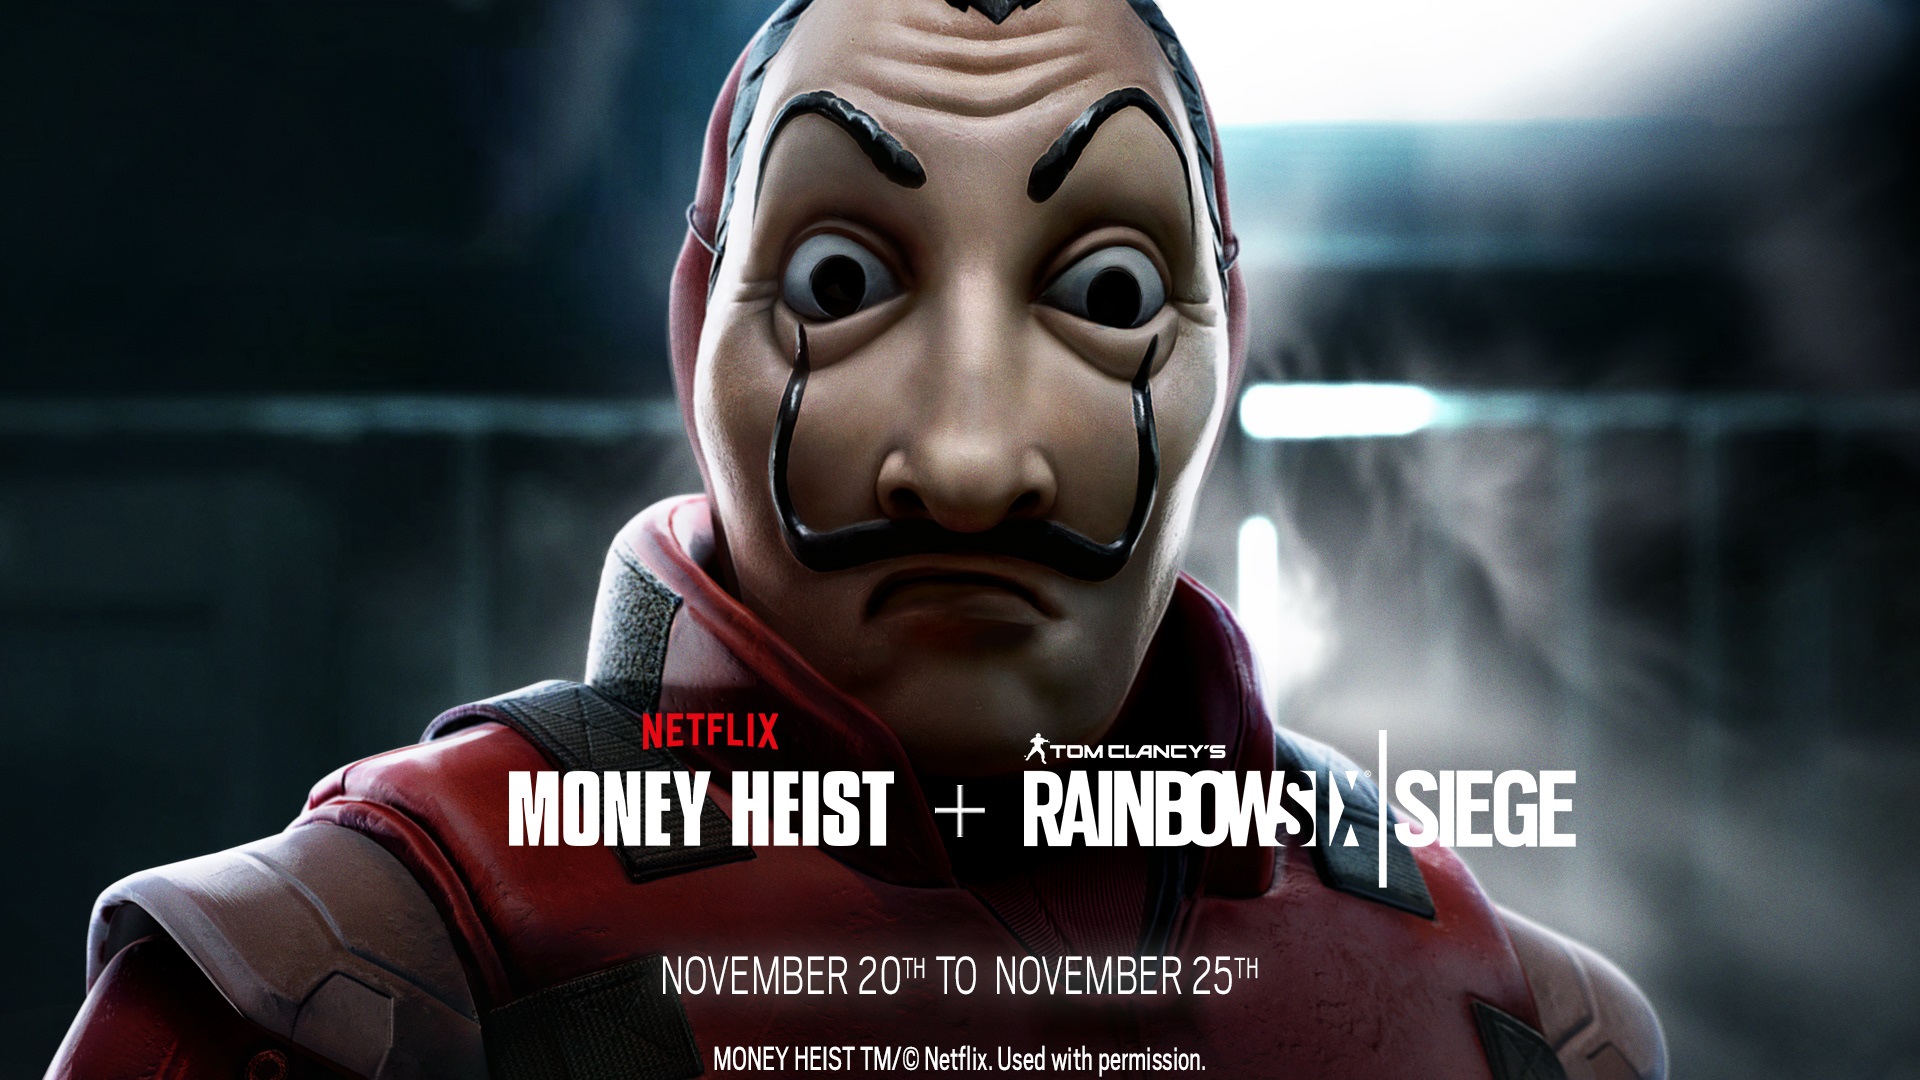 TOM CLANCY’S RAINBOW SIX SIEGE Lets You Discover the Limited Time Mini Event MONEY HEIST for Free this Weekend